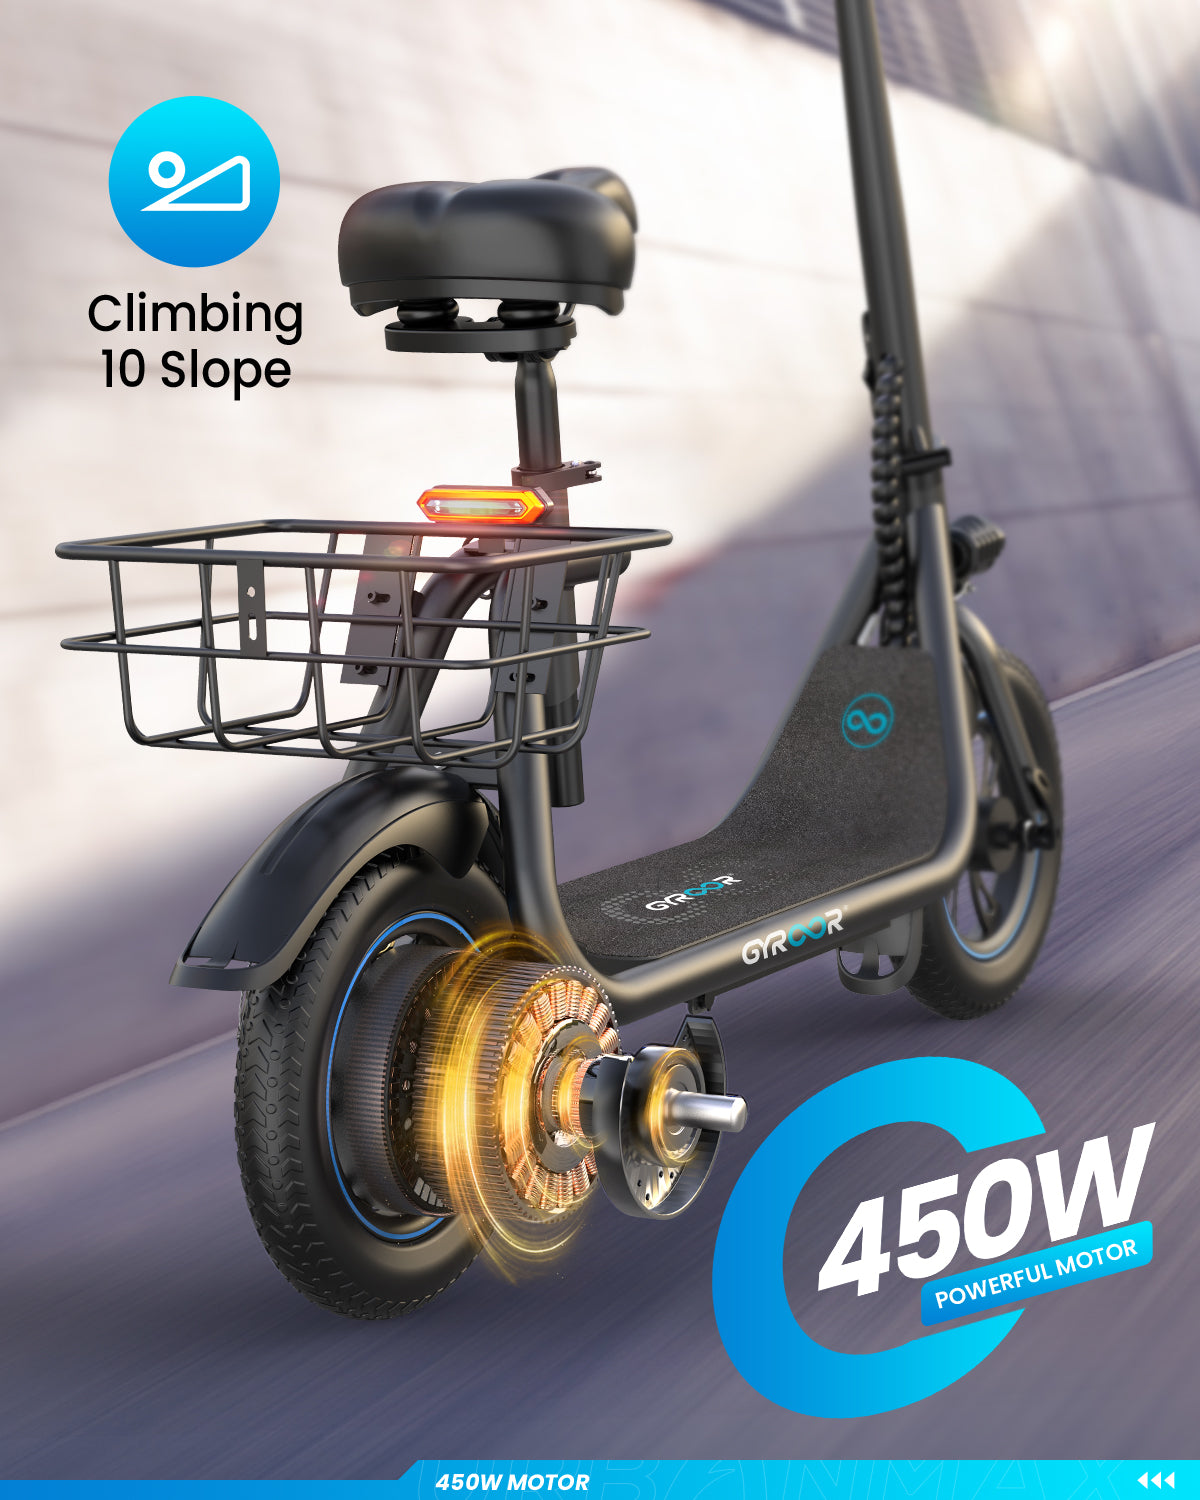 Gyroor C1 Electric Scooter With Seat & Carry Basket